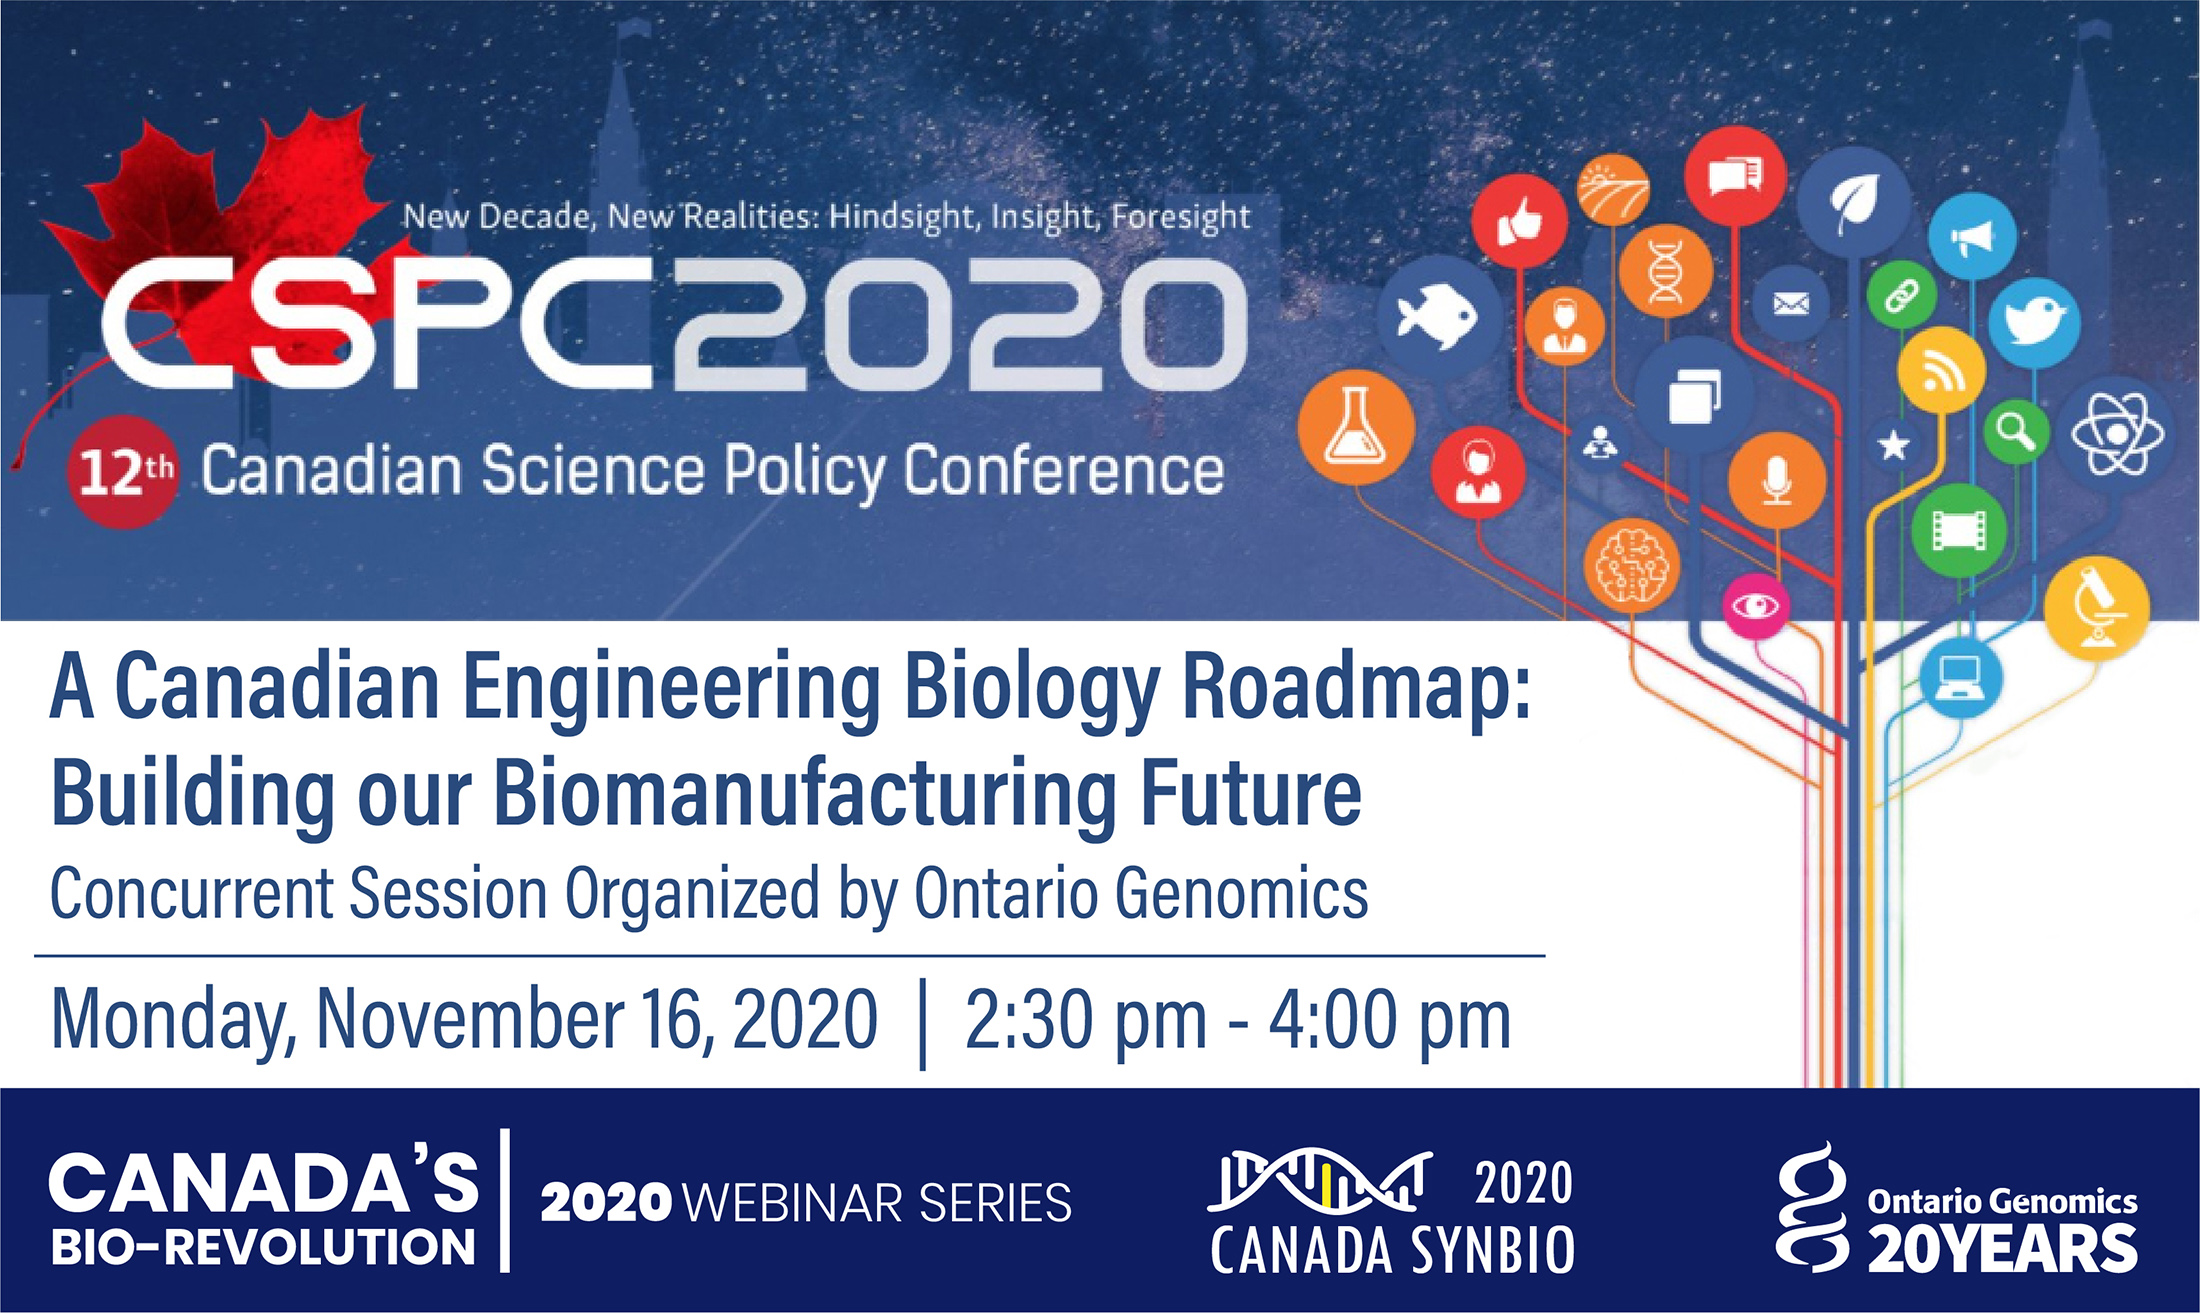 A Canadian Engineering Biology Roadmap: Building our Biomanufacturing Future